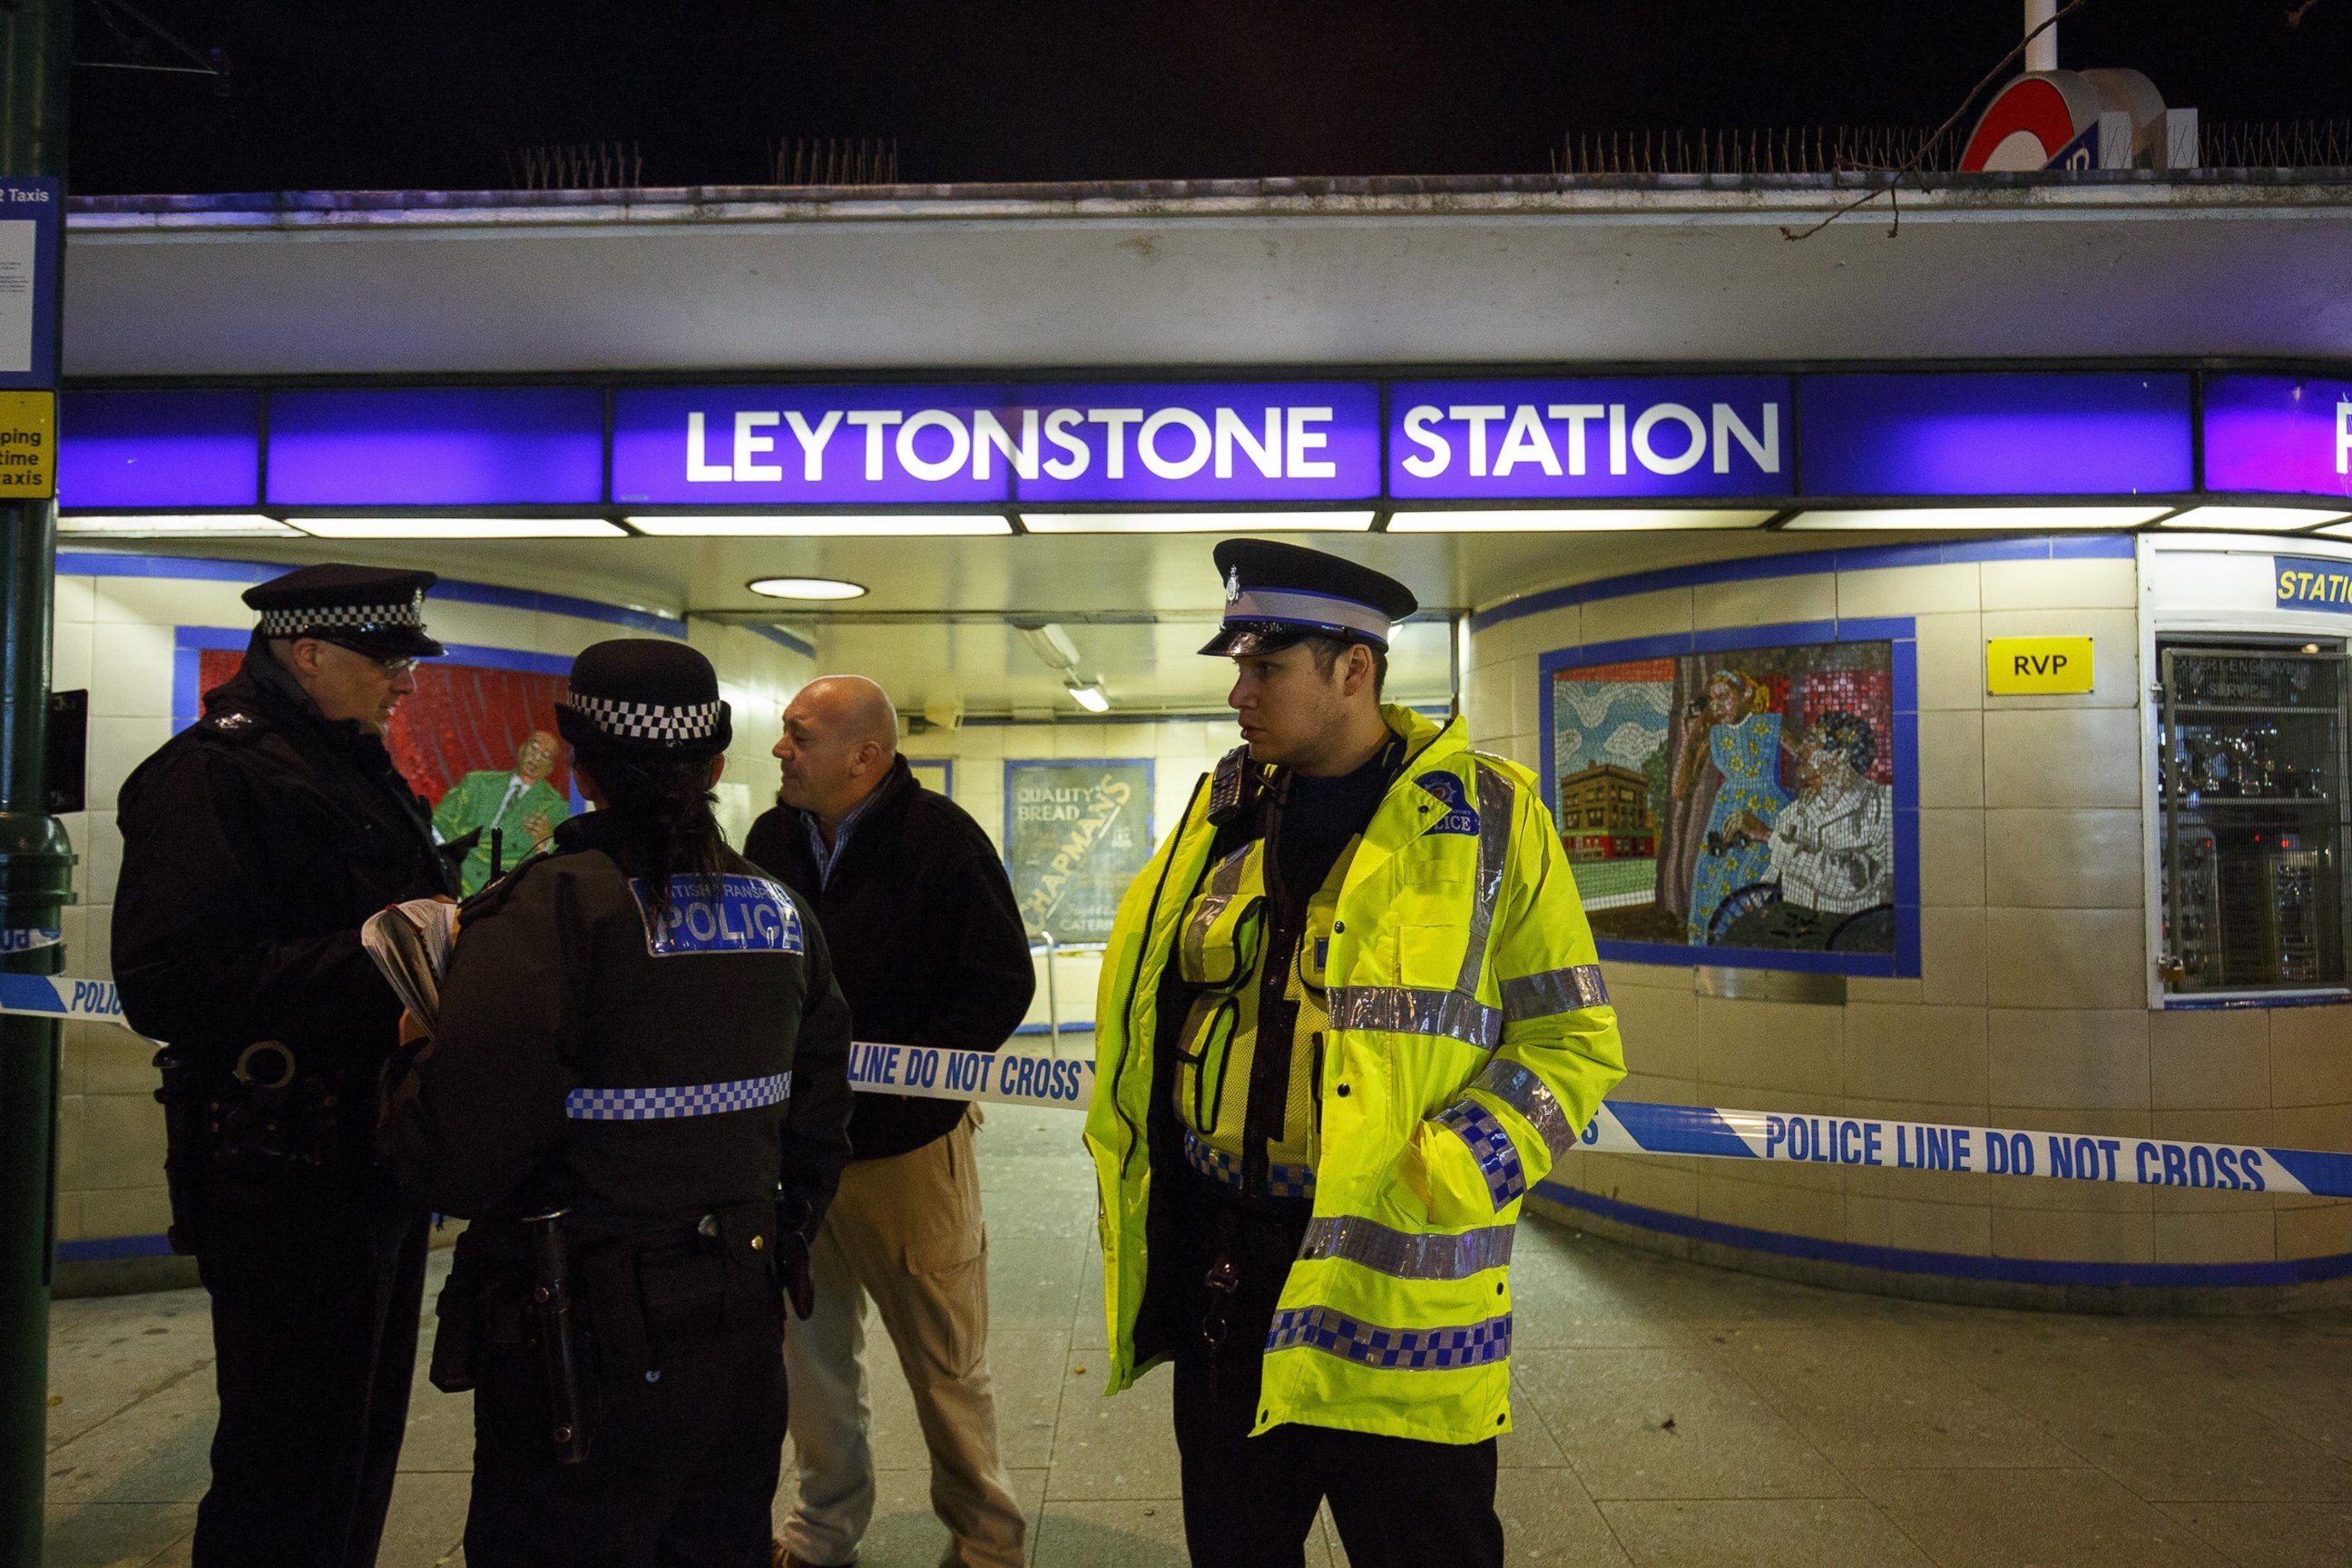 PHOTO: Police officers and crime scene investigators investigate a crime scene at Leytonstone tube station in east London on Dec. 05, 2015, after a man was seriously injured in a knife attack.